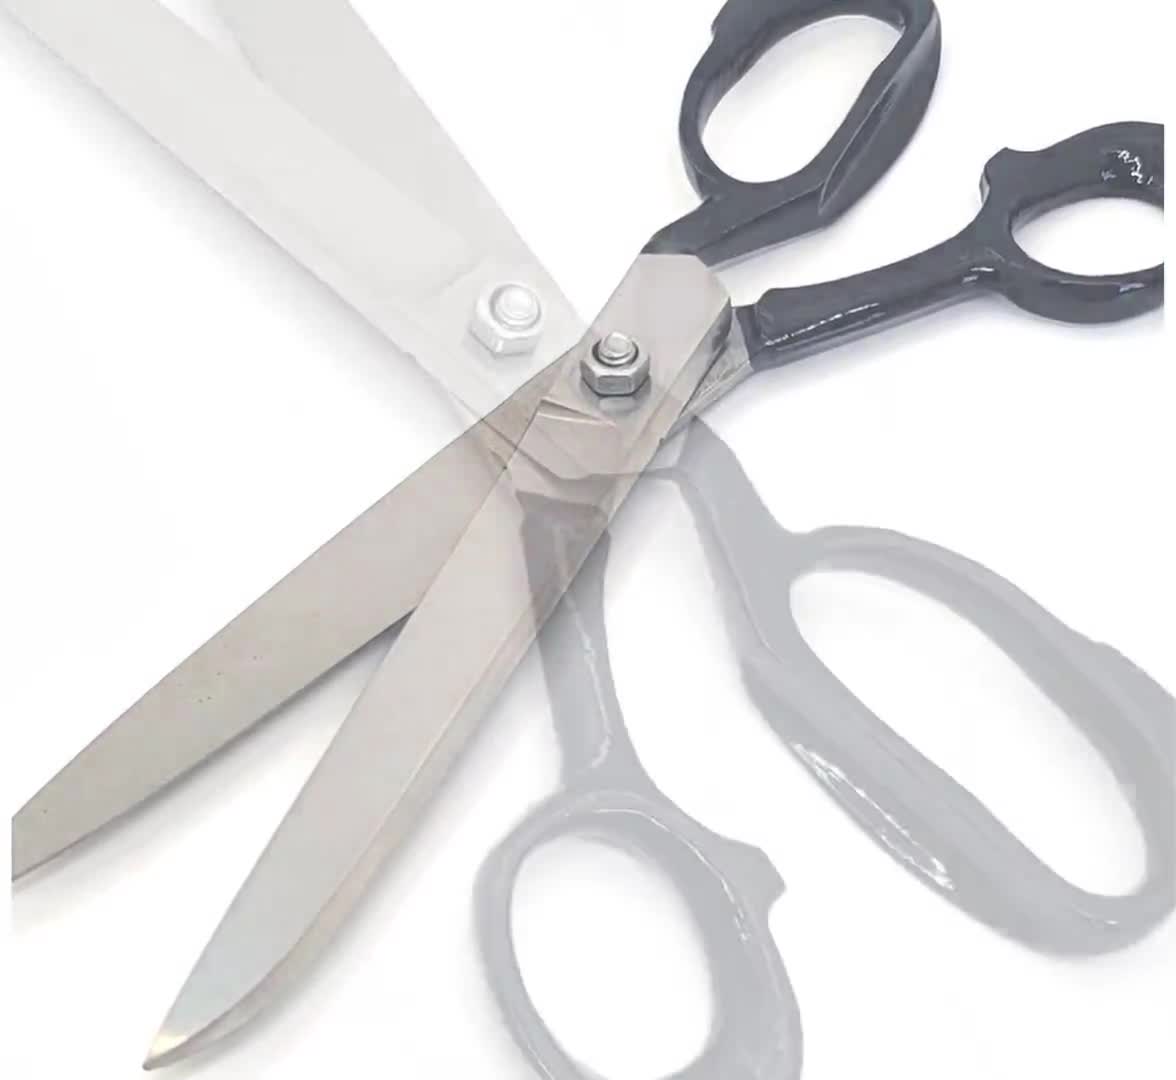 10 Inch Chrome Tailoring Shears High Quality Atelier Notions